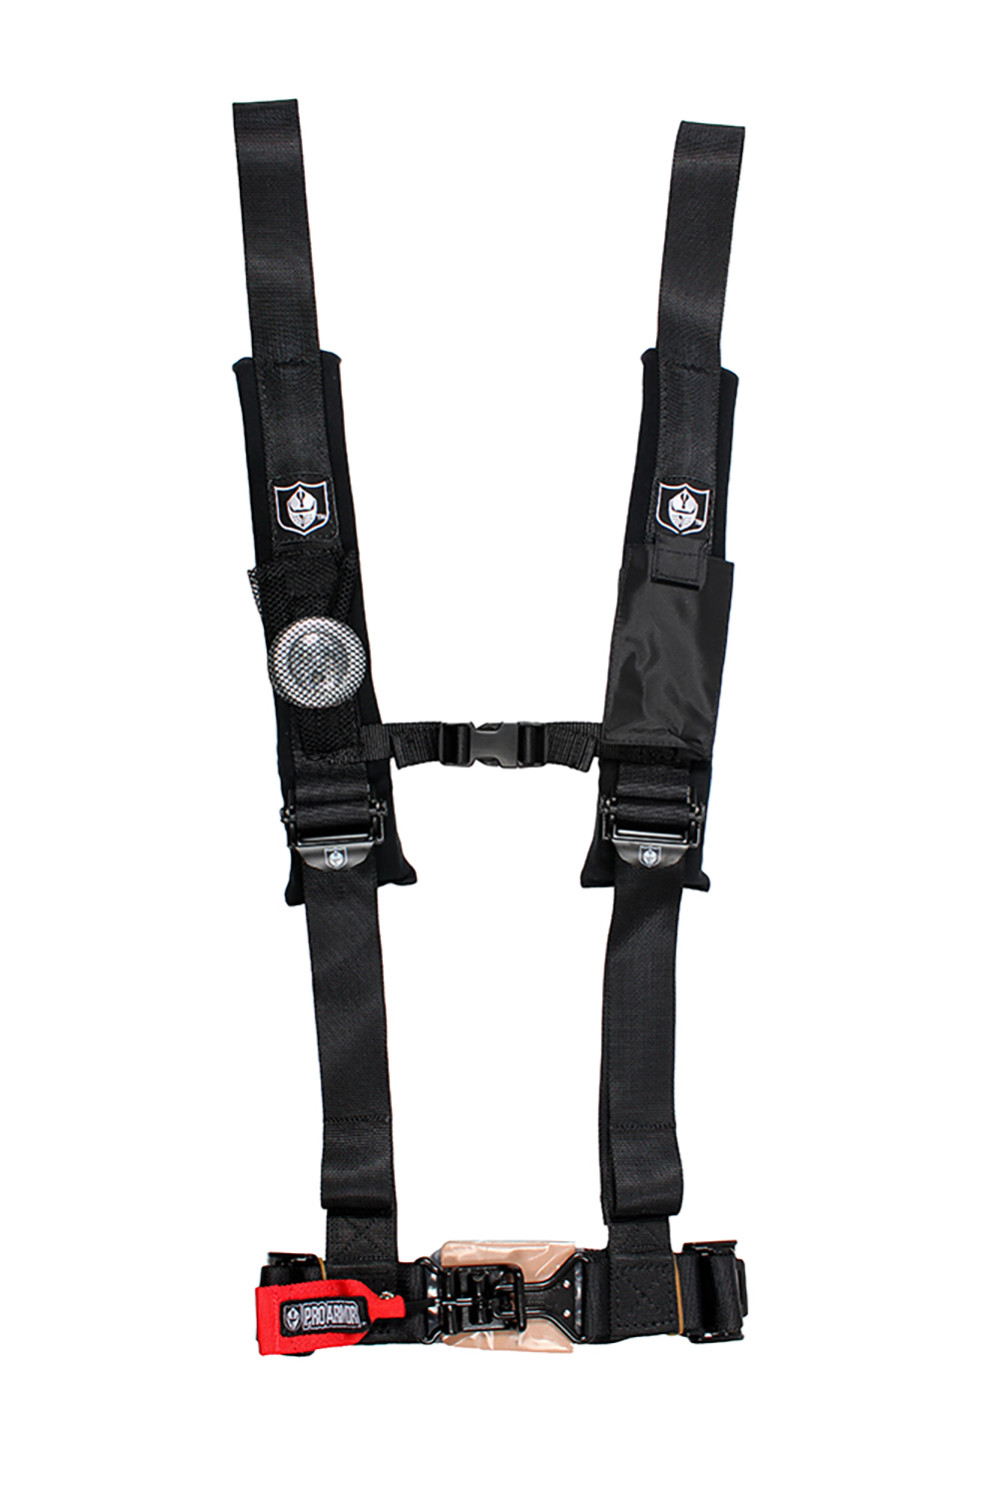 Pro Armor A114230 4 Point UTV Harness 3 Inch Straps with Flashlight 1 or 2 pack 